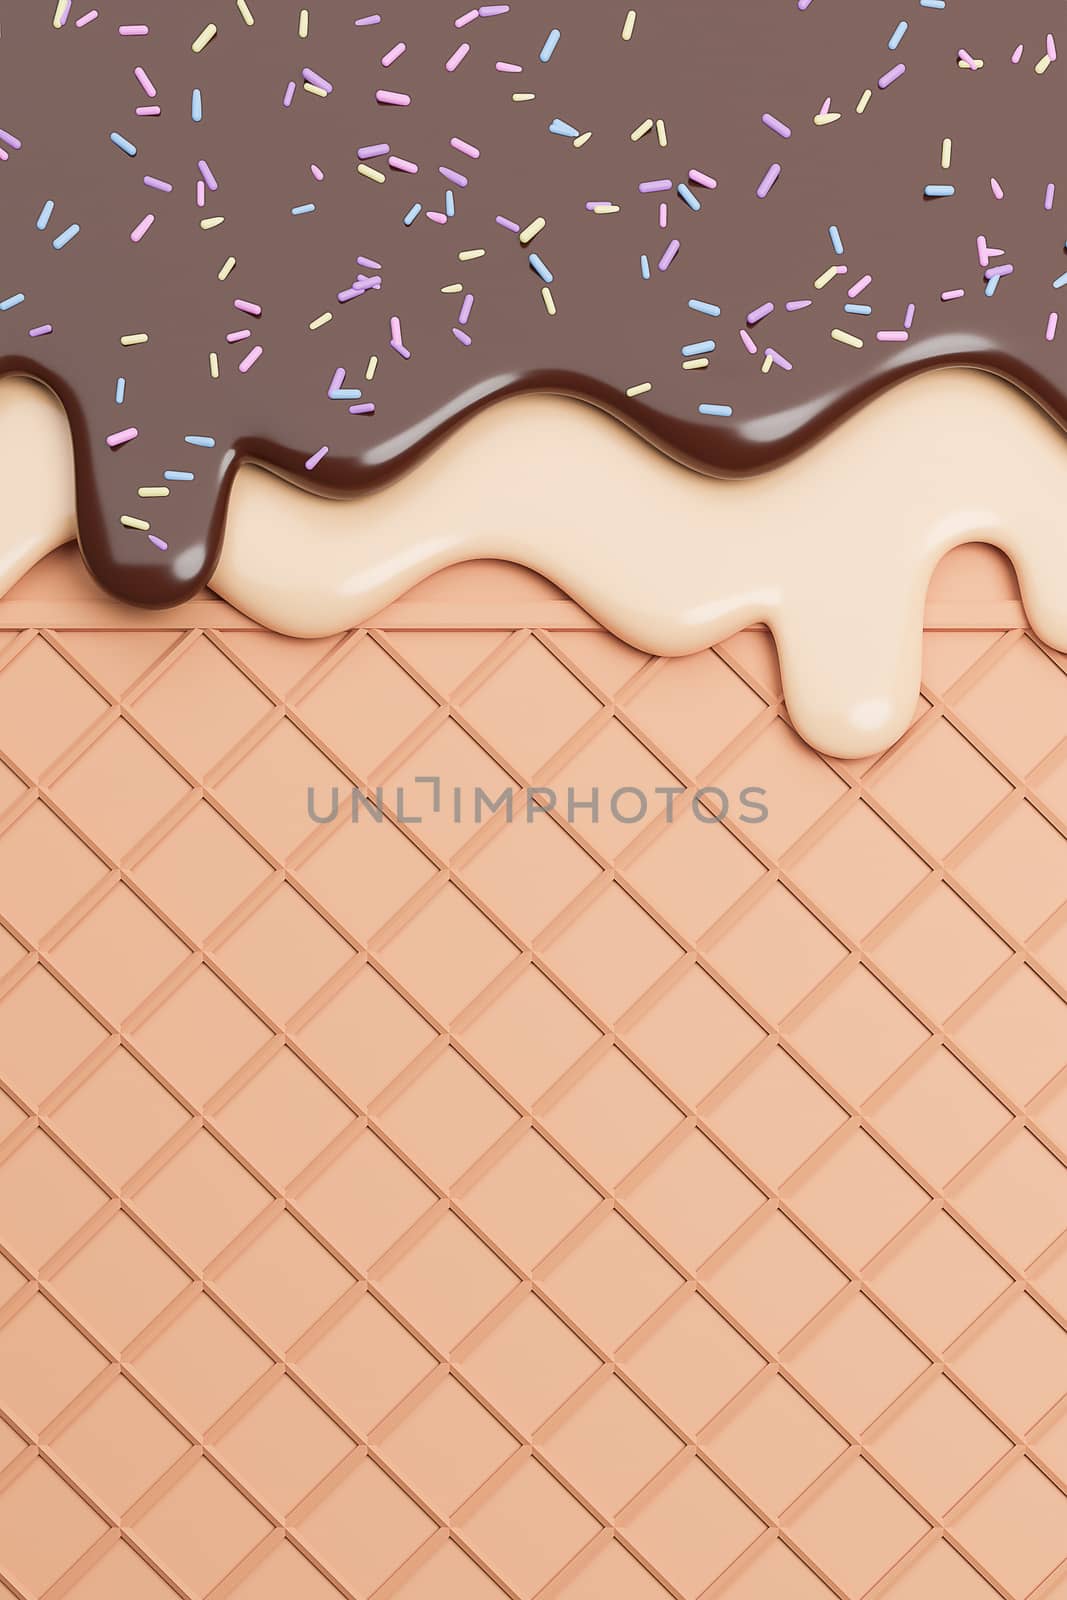 Chocolate and Vanilla Ice Cream Melted with Sprinkles on Wafer Background.,3d model and illustration.